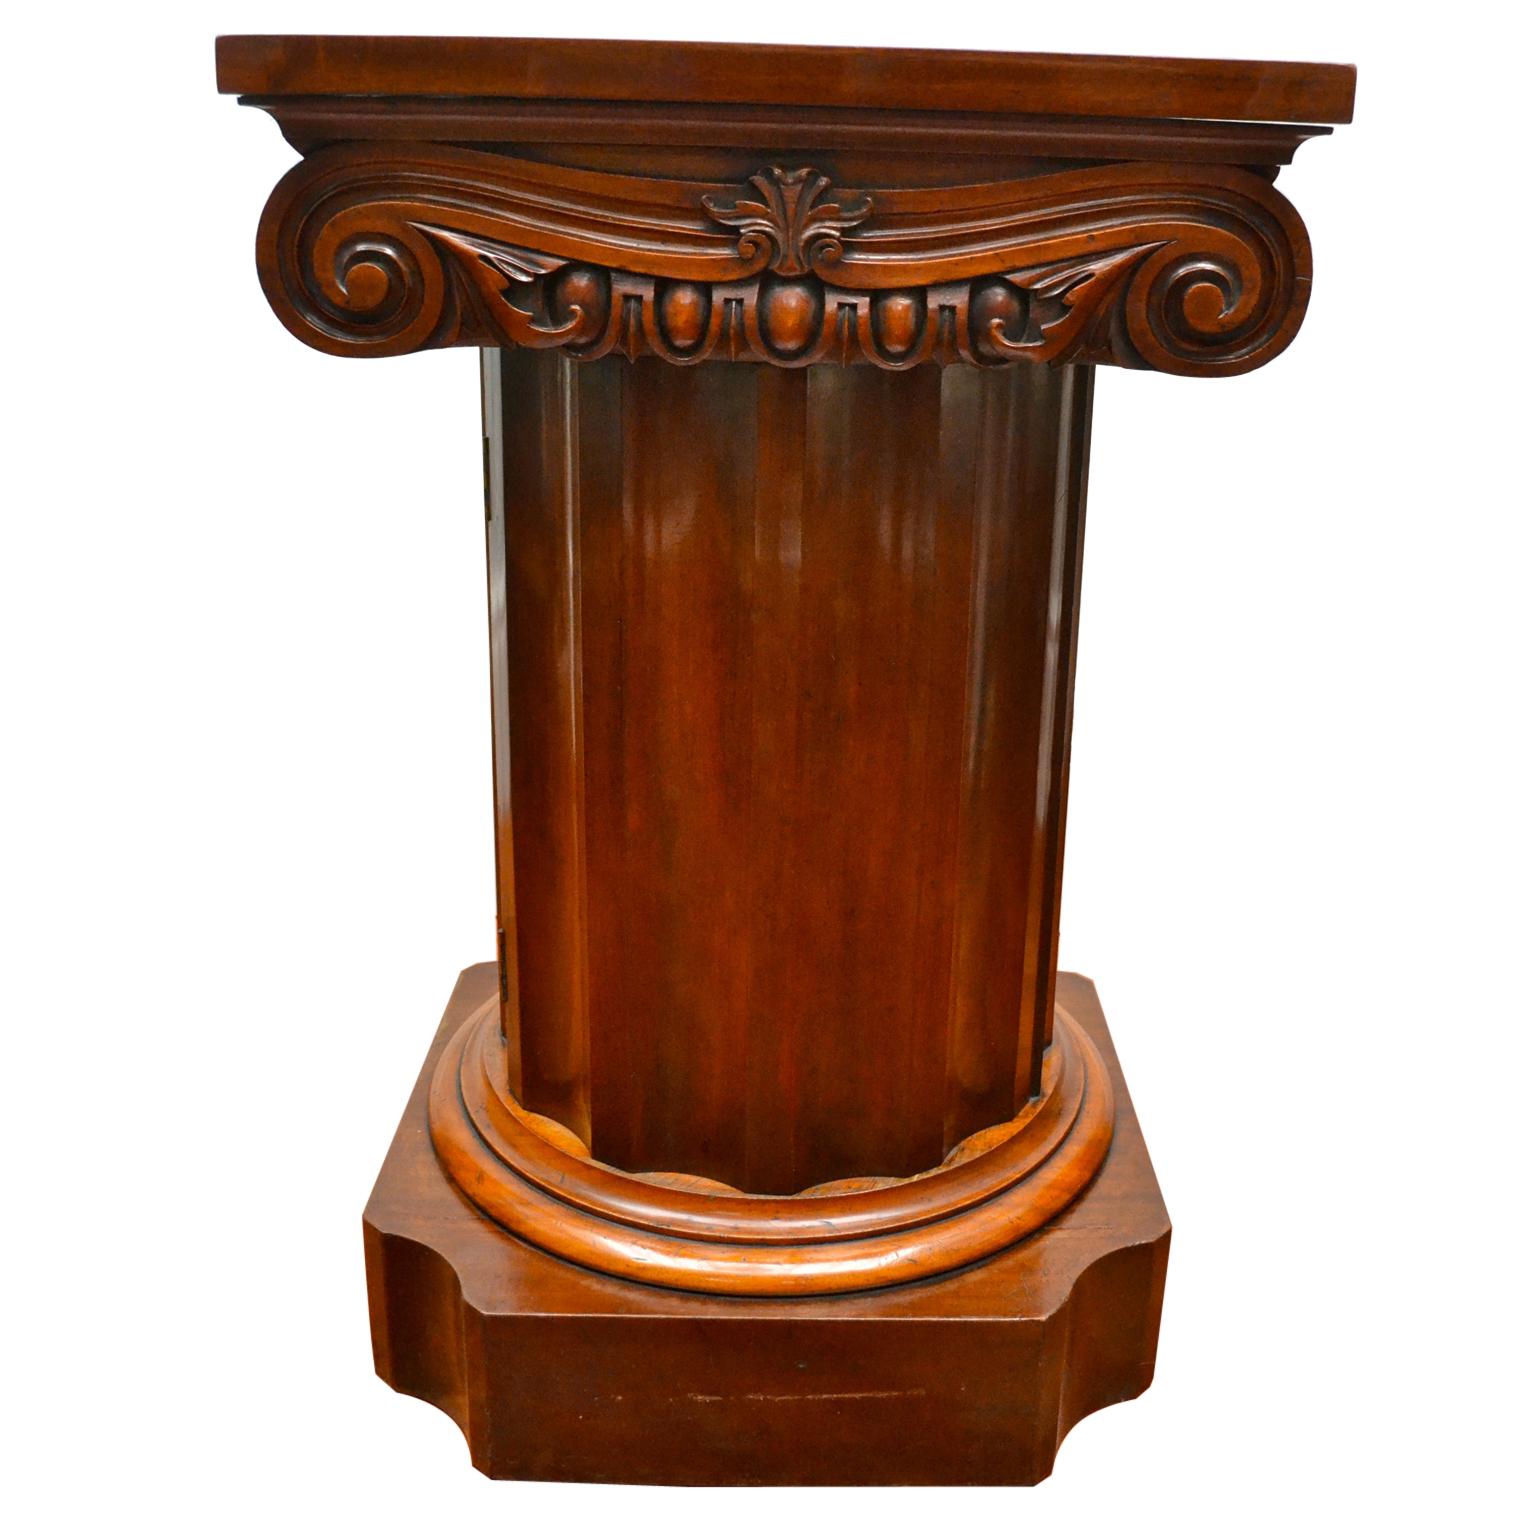 A fine example of neoclassical English Regency furniture. The pedestal cupboard is made of the highest quality Honduran mahogany. The round fluted column rests on a shaped rectangular base and is topped with a Corrinthian capital on three sides.